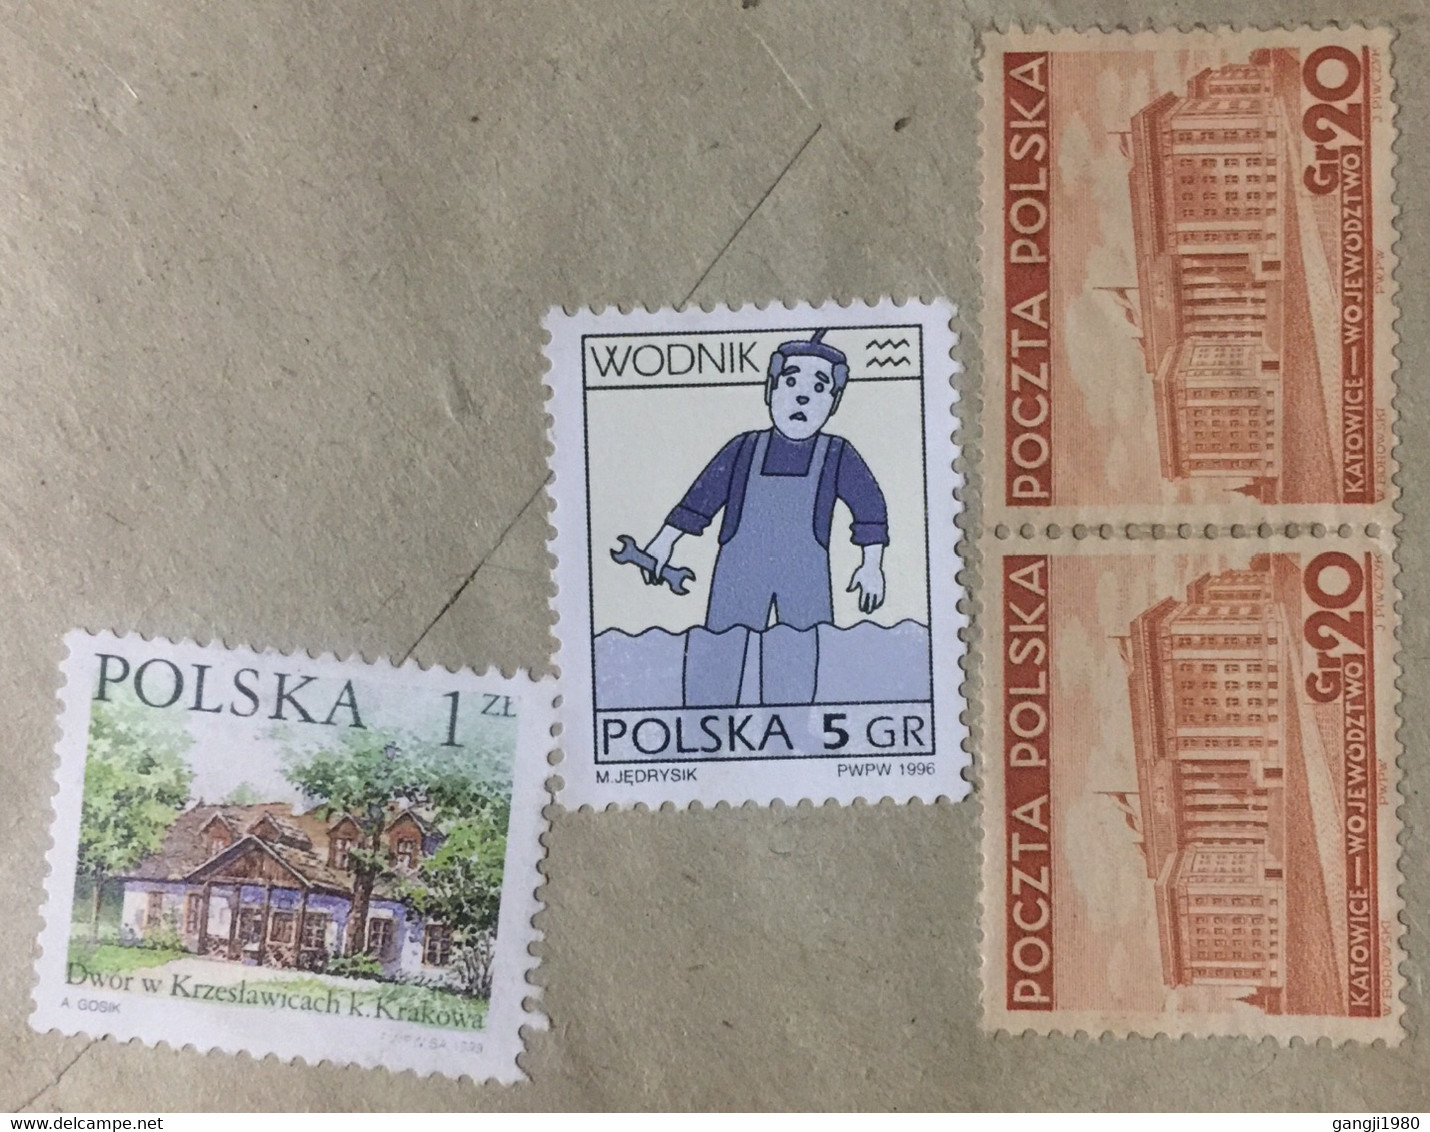 POLAND 2000, USED AIRMAIL COVER TO INDIA 4 DIFFERENT 1958 PICTURAL SPECIAL CANCELLATION, KATOWIDE ,HOUSE MUSIC,BUILDIN, - Briefe U. Dokumente